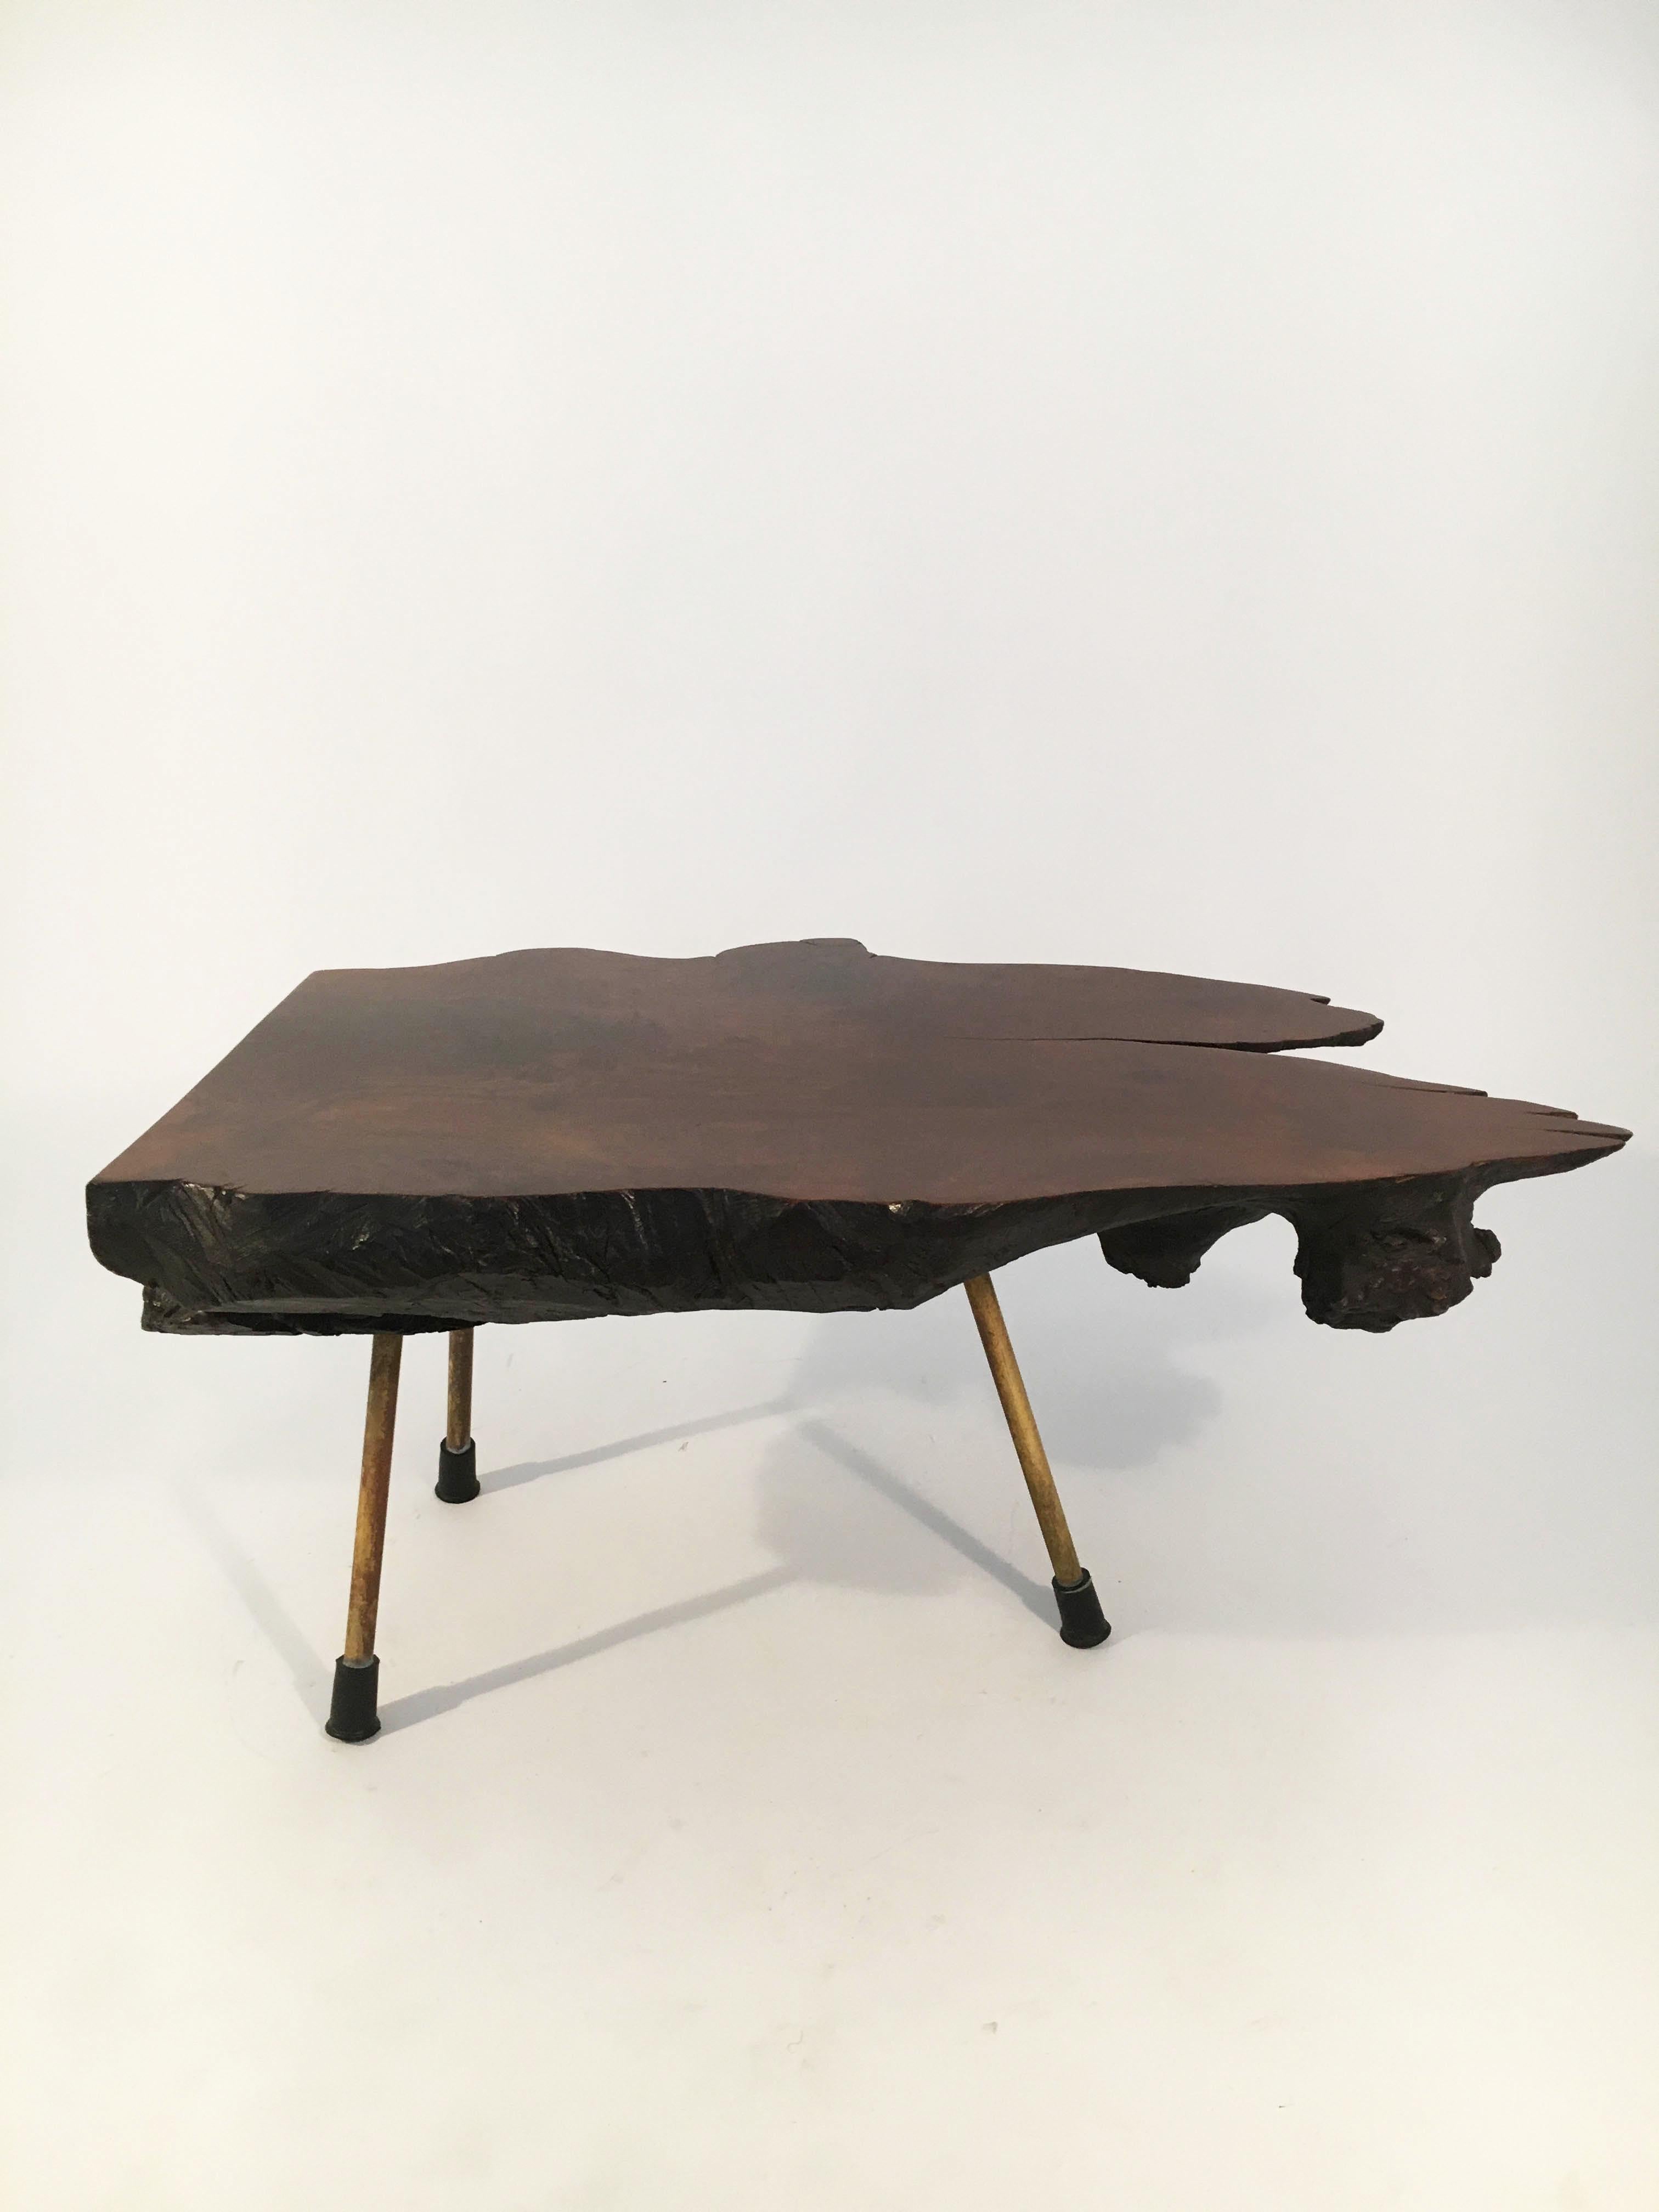 Dramatic large tree trunk table with a great color and size. One of the finest we have ever seen. Marked on the leg with the numbers 1, 2, 3. In excellent vintage condition with just the right amount of gently aged patina on the brass legs and